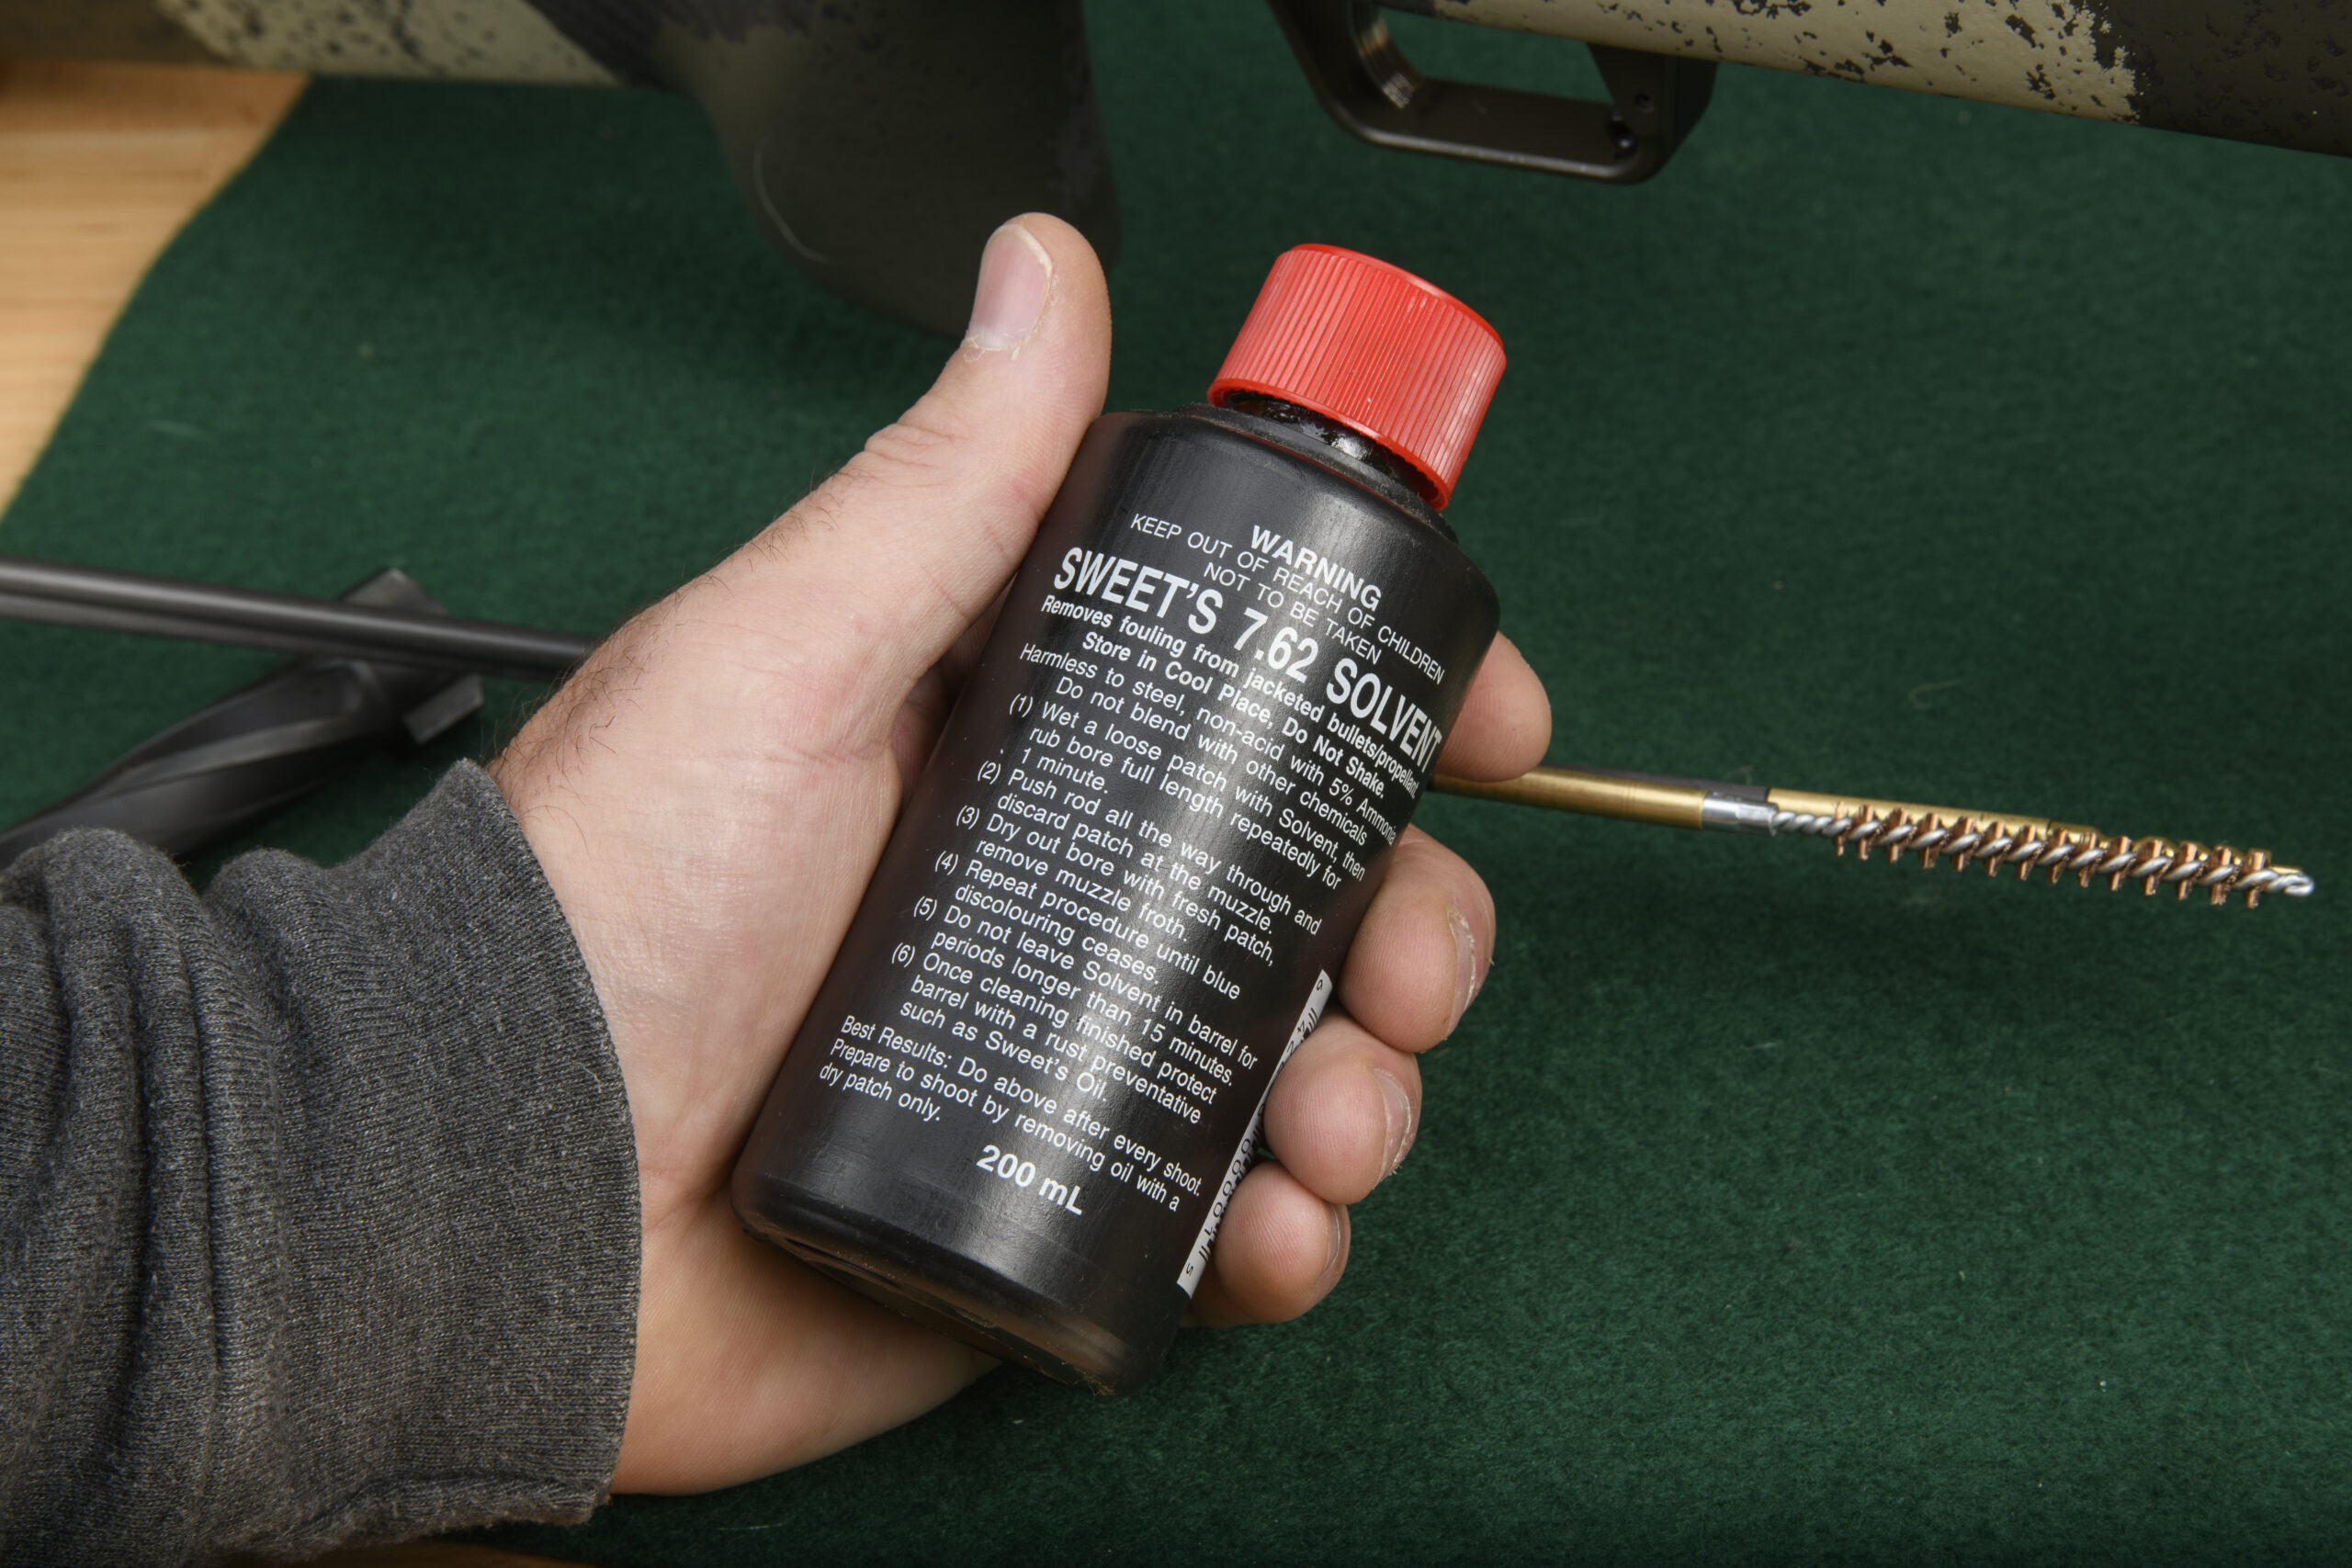 A hand holding a black bottle with a red cap and the words "Sweet's 7.62 Solvent" on top of a green felt gun cleaning pad.